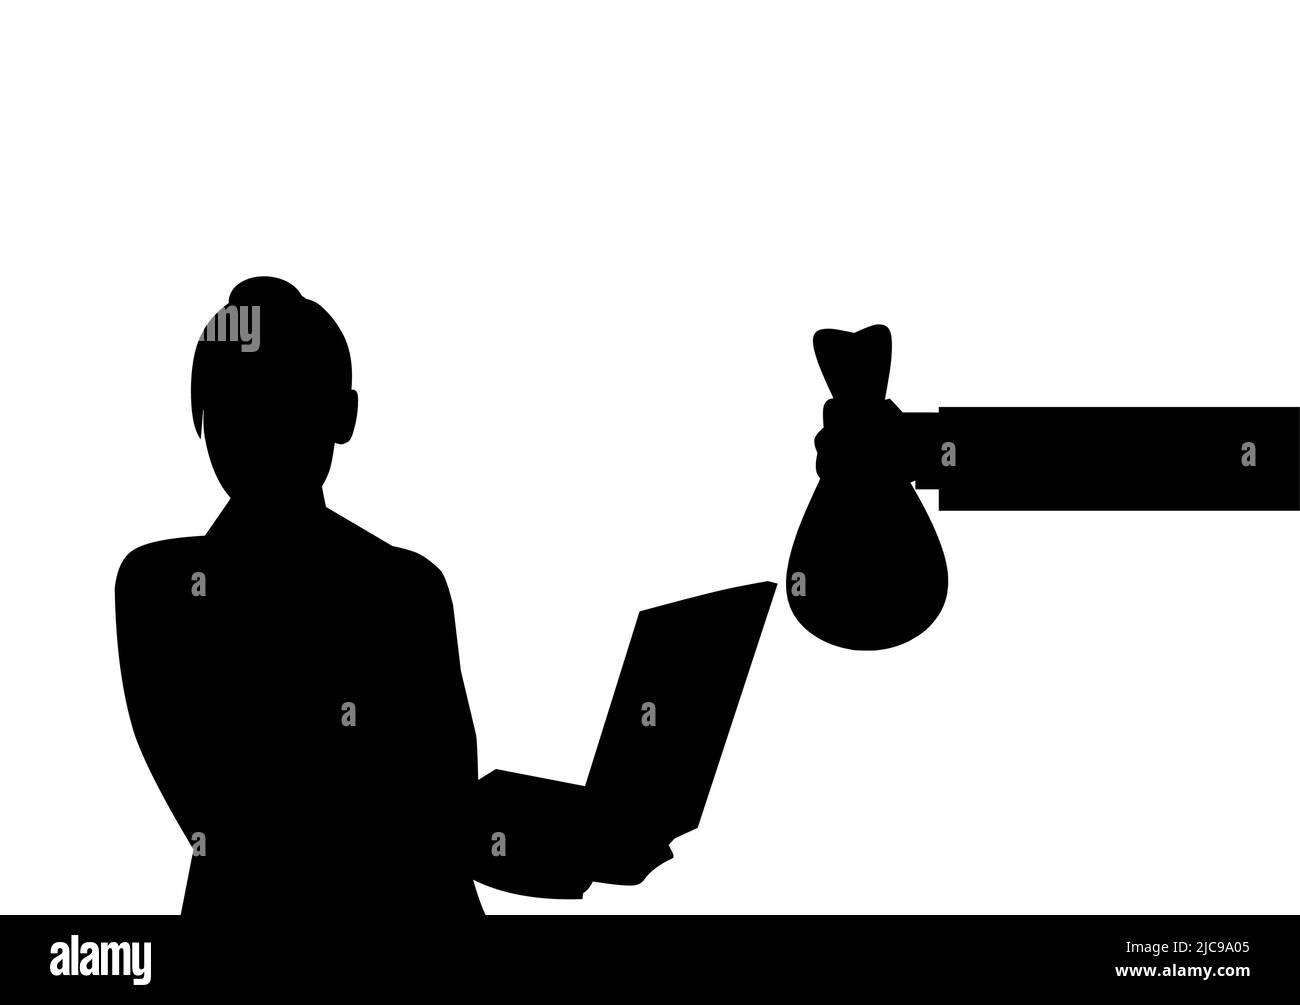 A freelancer doing her work on a laptop or computer receiving money, Hand giving money, working from home, Freelancing, Silhouette Stock Vector